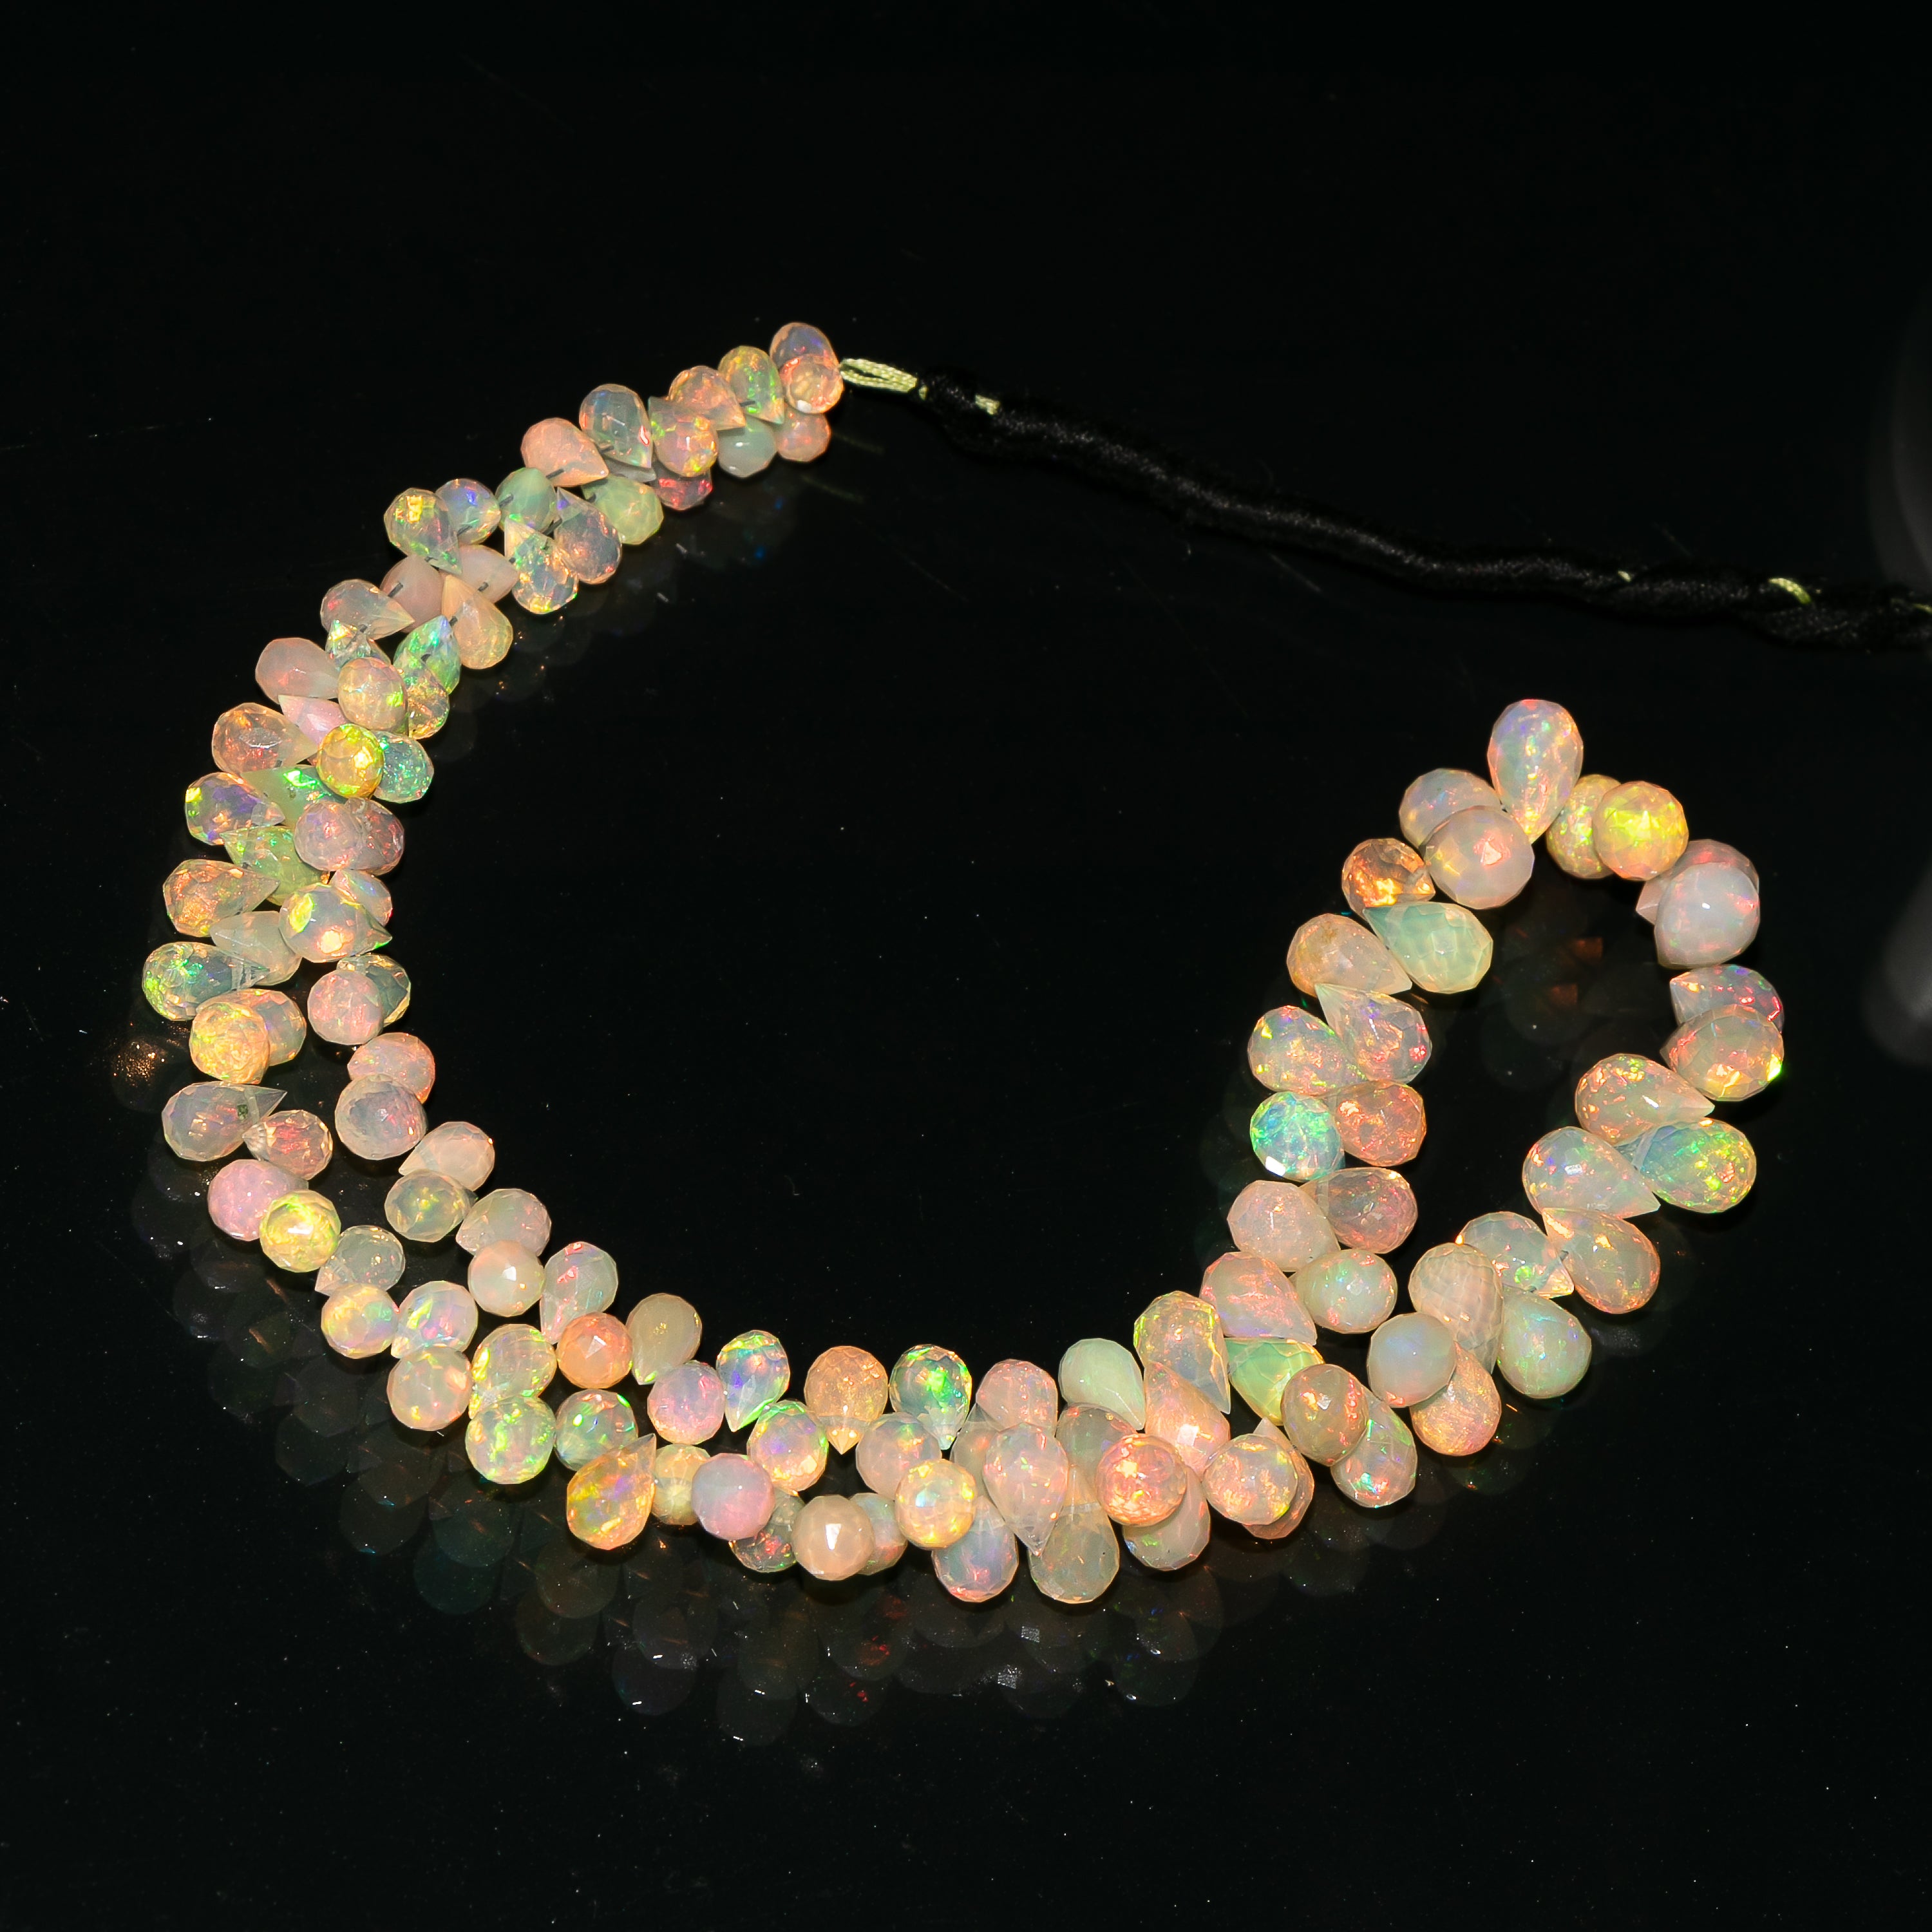 Ethiopian Opal Faceted Beads, 3.5X5.5-6X10mm Ethiopian Opal Drops Beads, Tear Drops Briolettes, Ethiopian Opal Beads, Fire Opal Beads